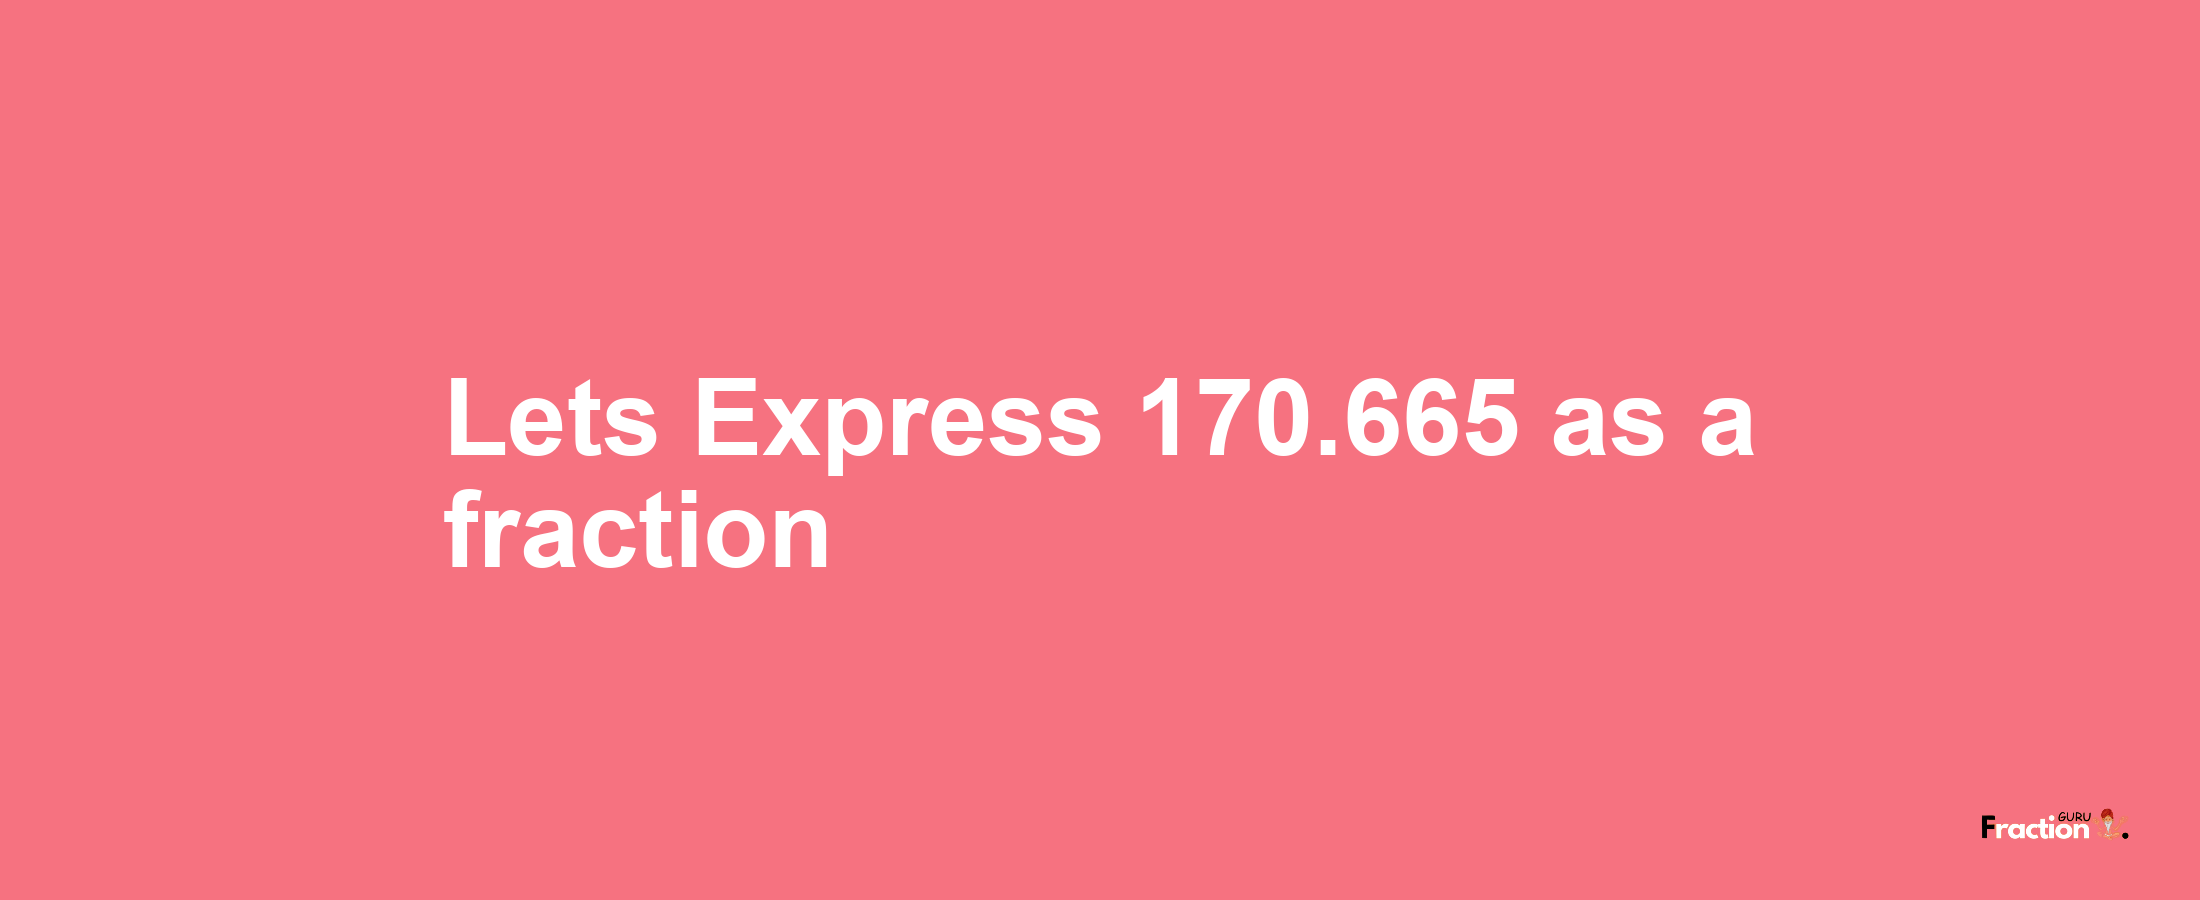 Lets Express 170.665 as afraction